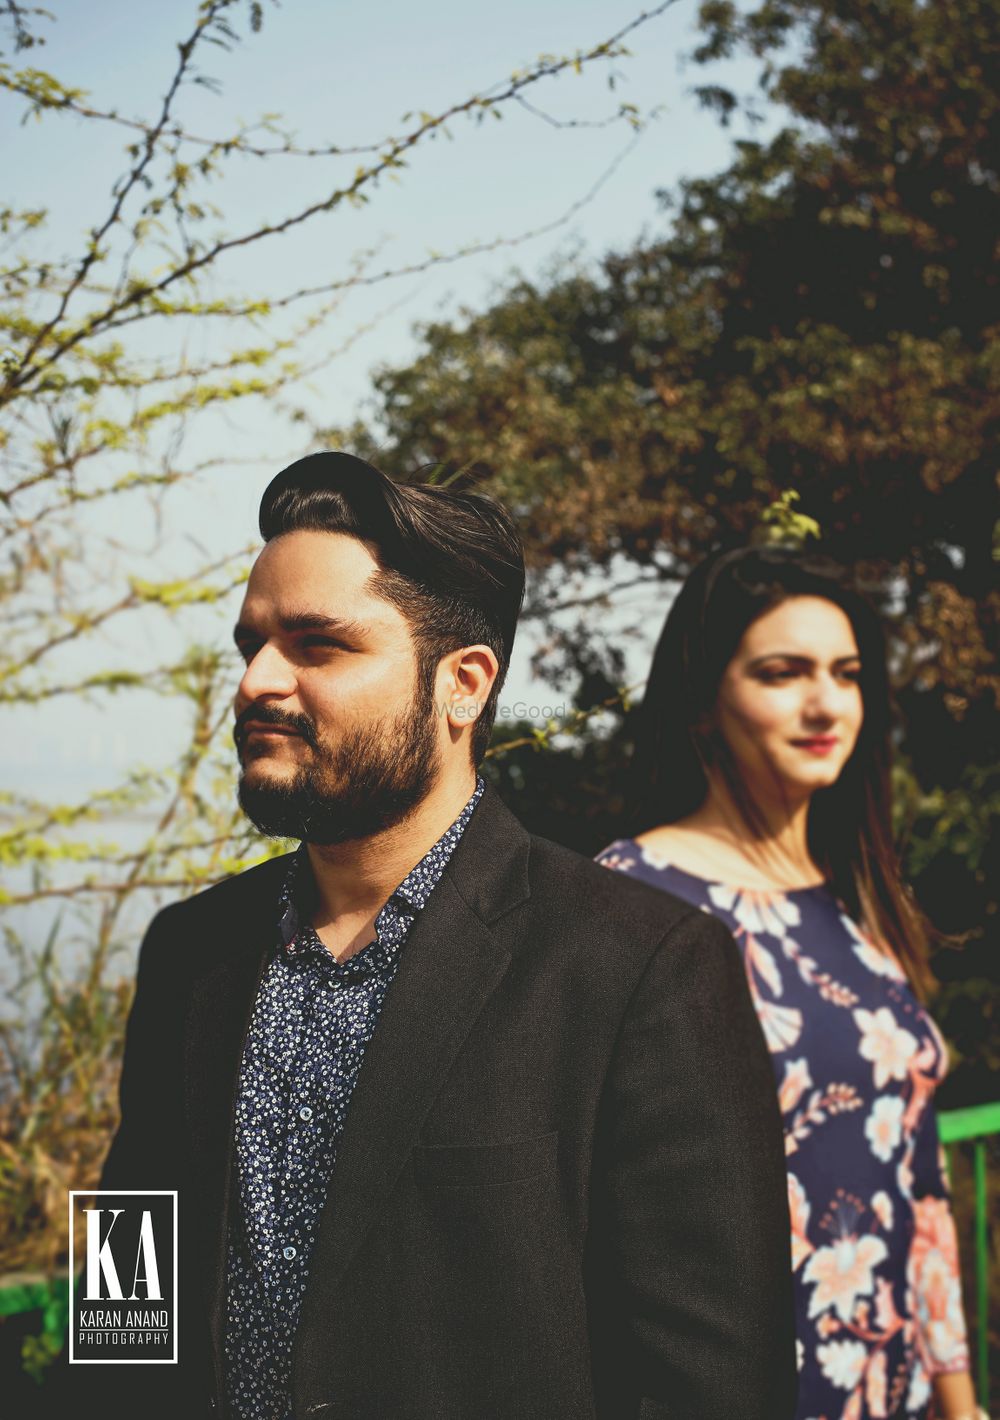 Photo From Poorvautam | Pre Wedding - By Karan Anand Photography